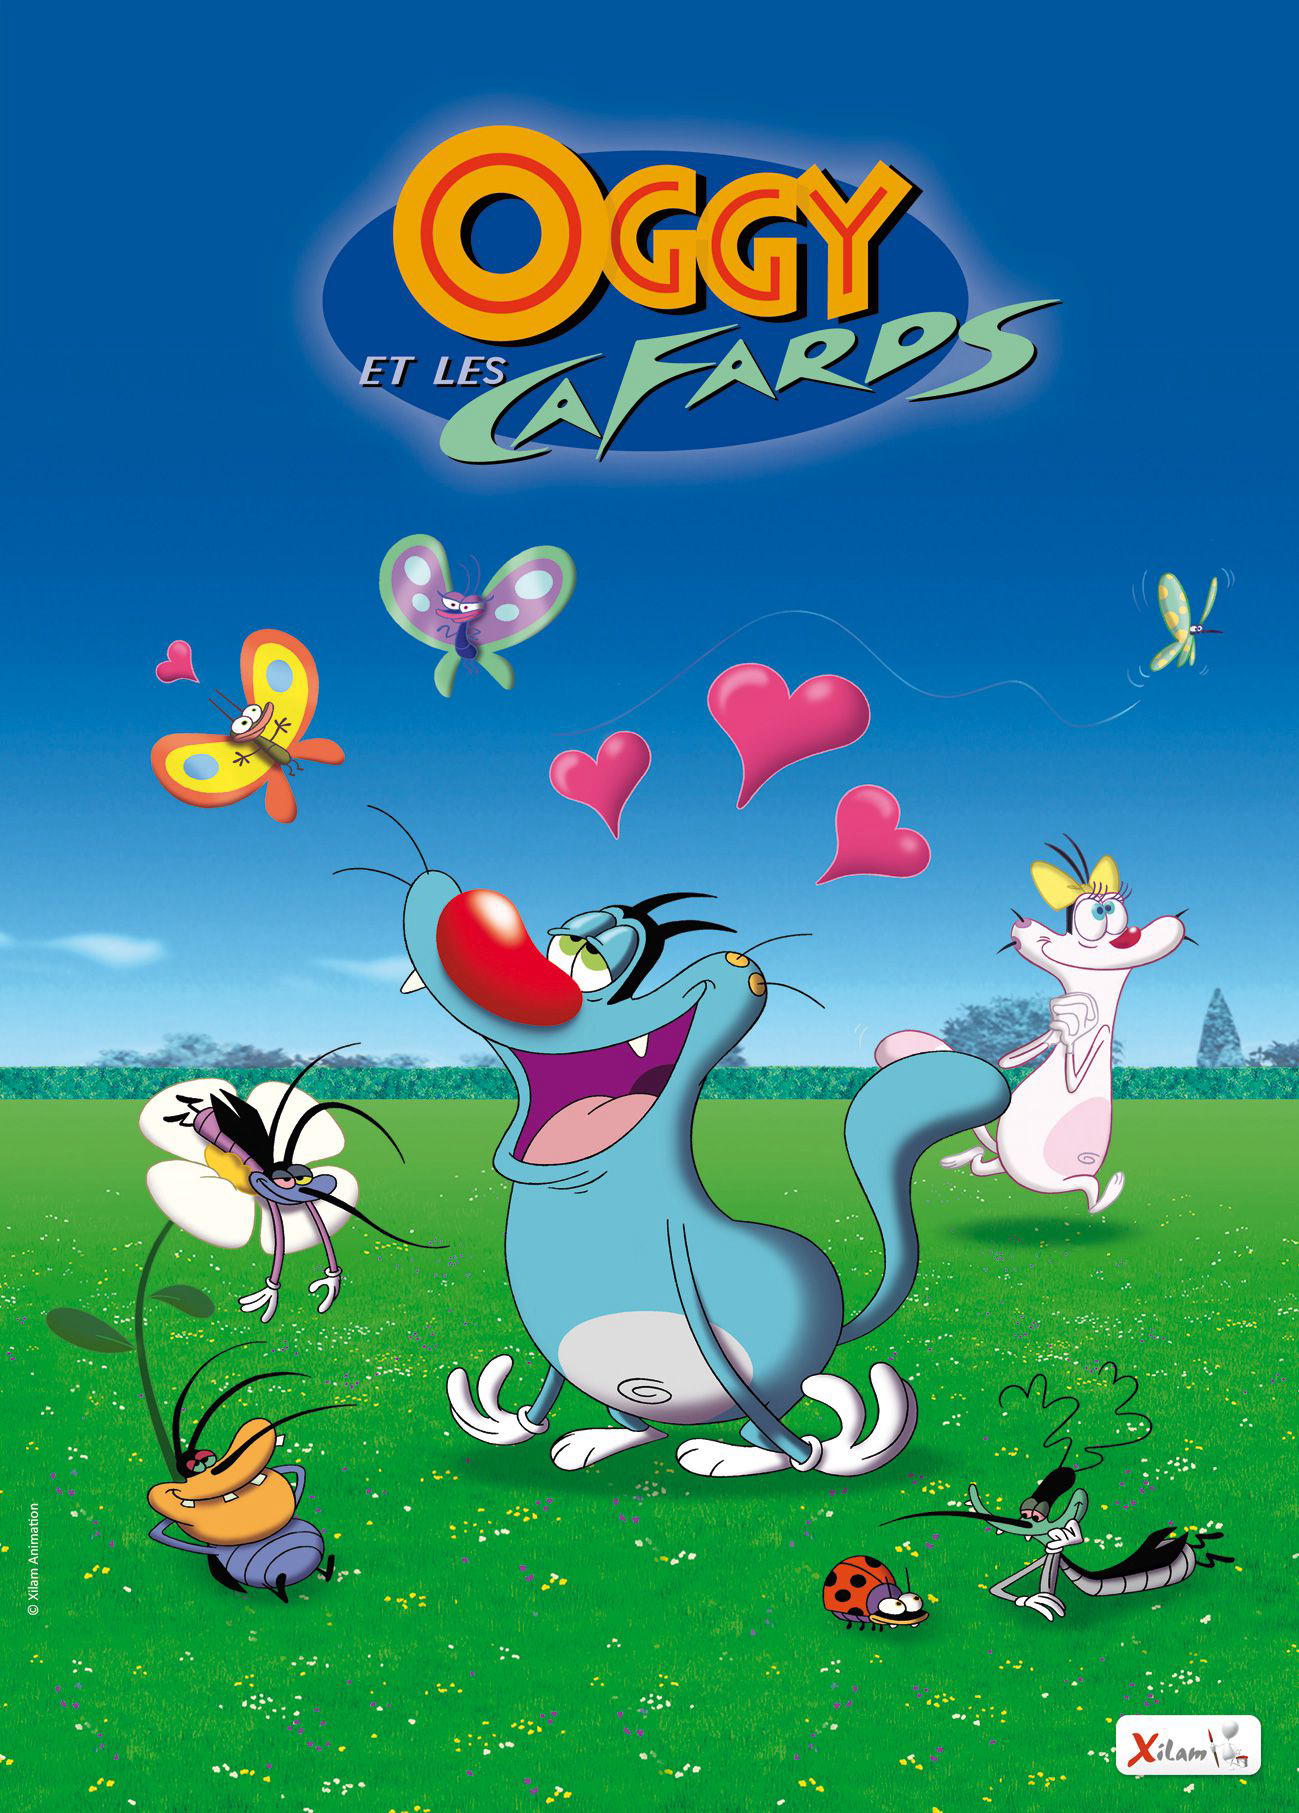 Poster Phim Oggy và những chú gián tinh nghịch (Oggy and the Cockroaches)